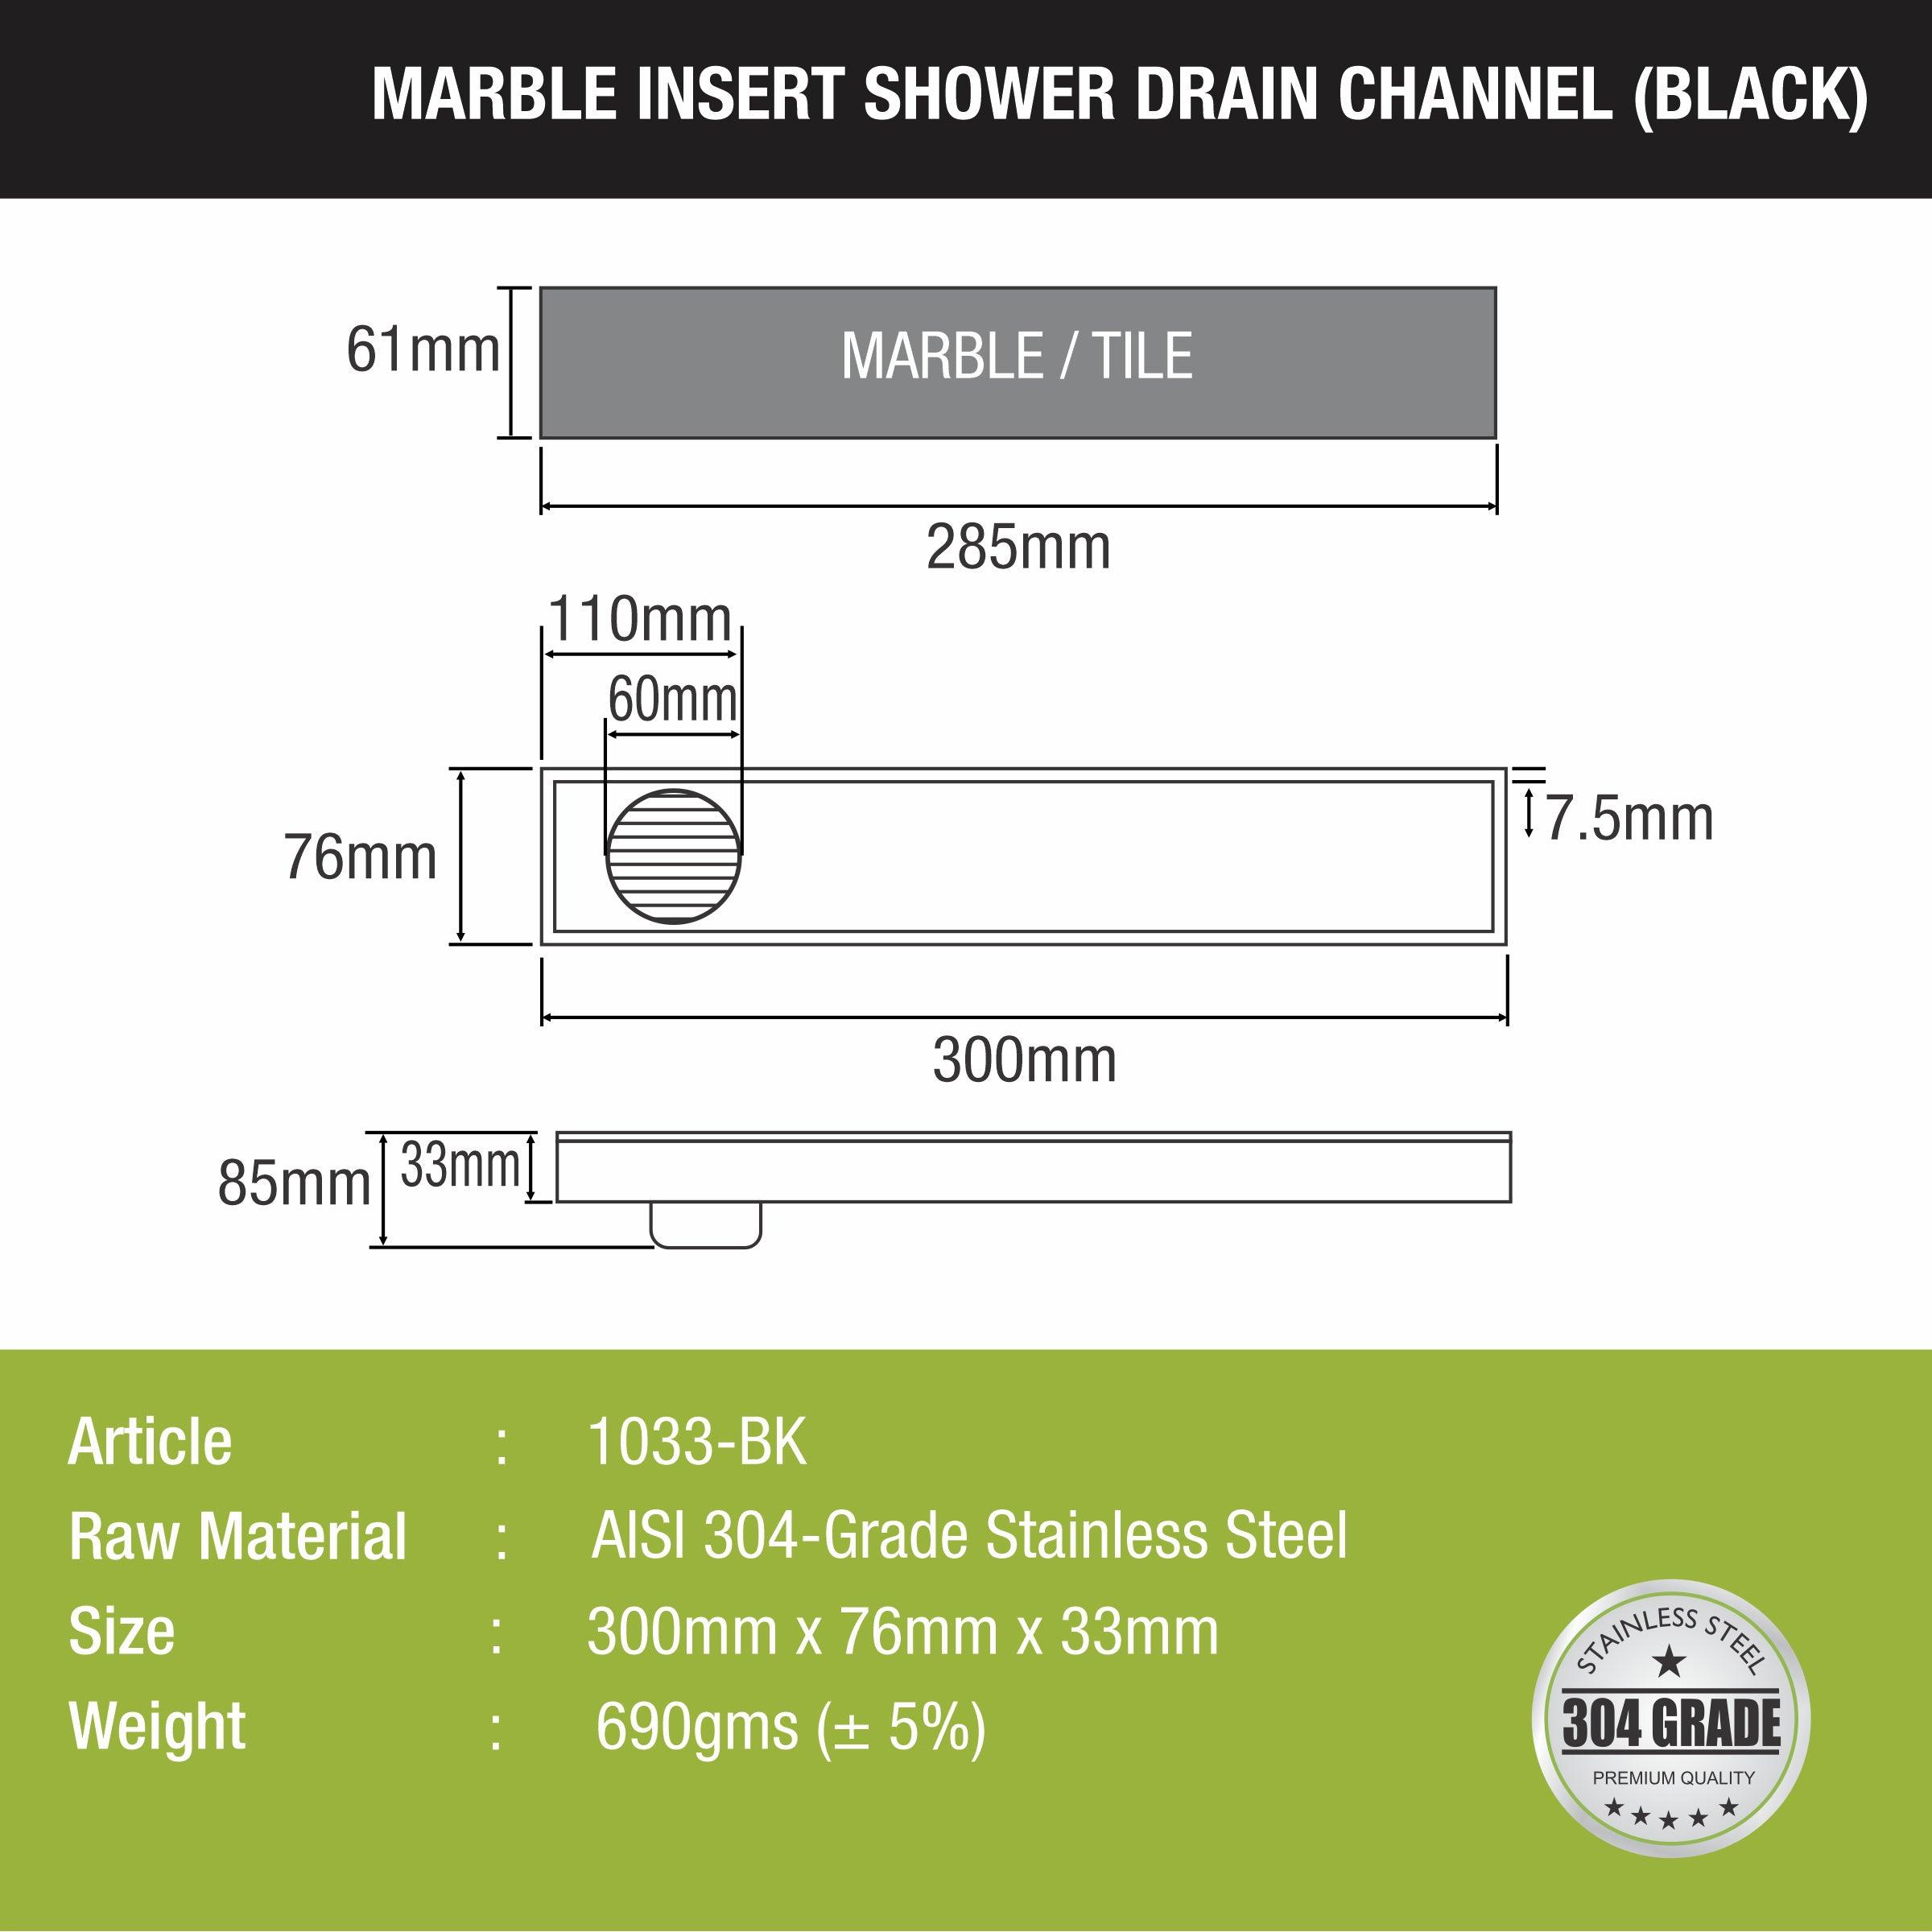 Marble Insert Shower Drain Channel - Black (12 x 3 Inches) size and measurement